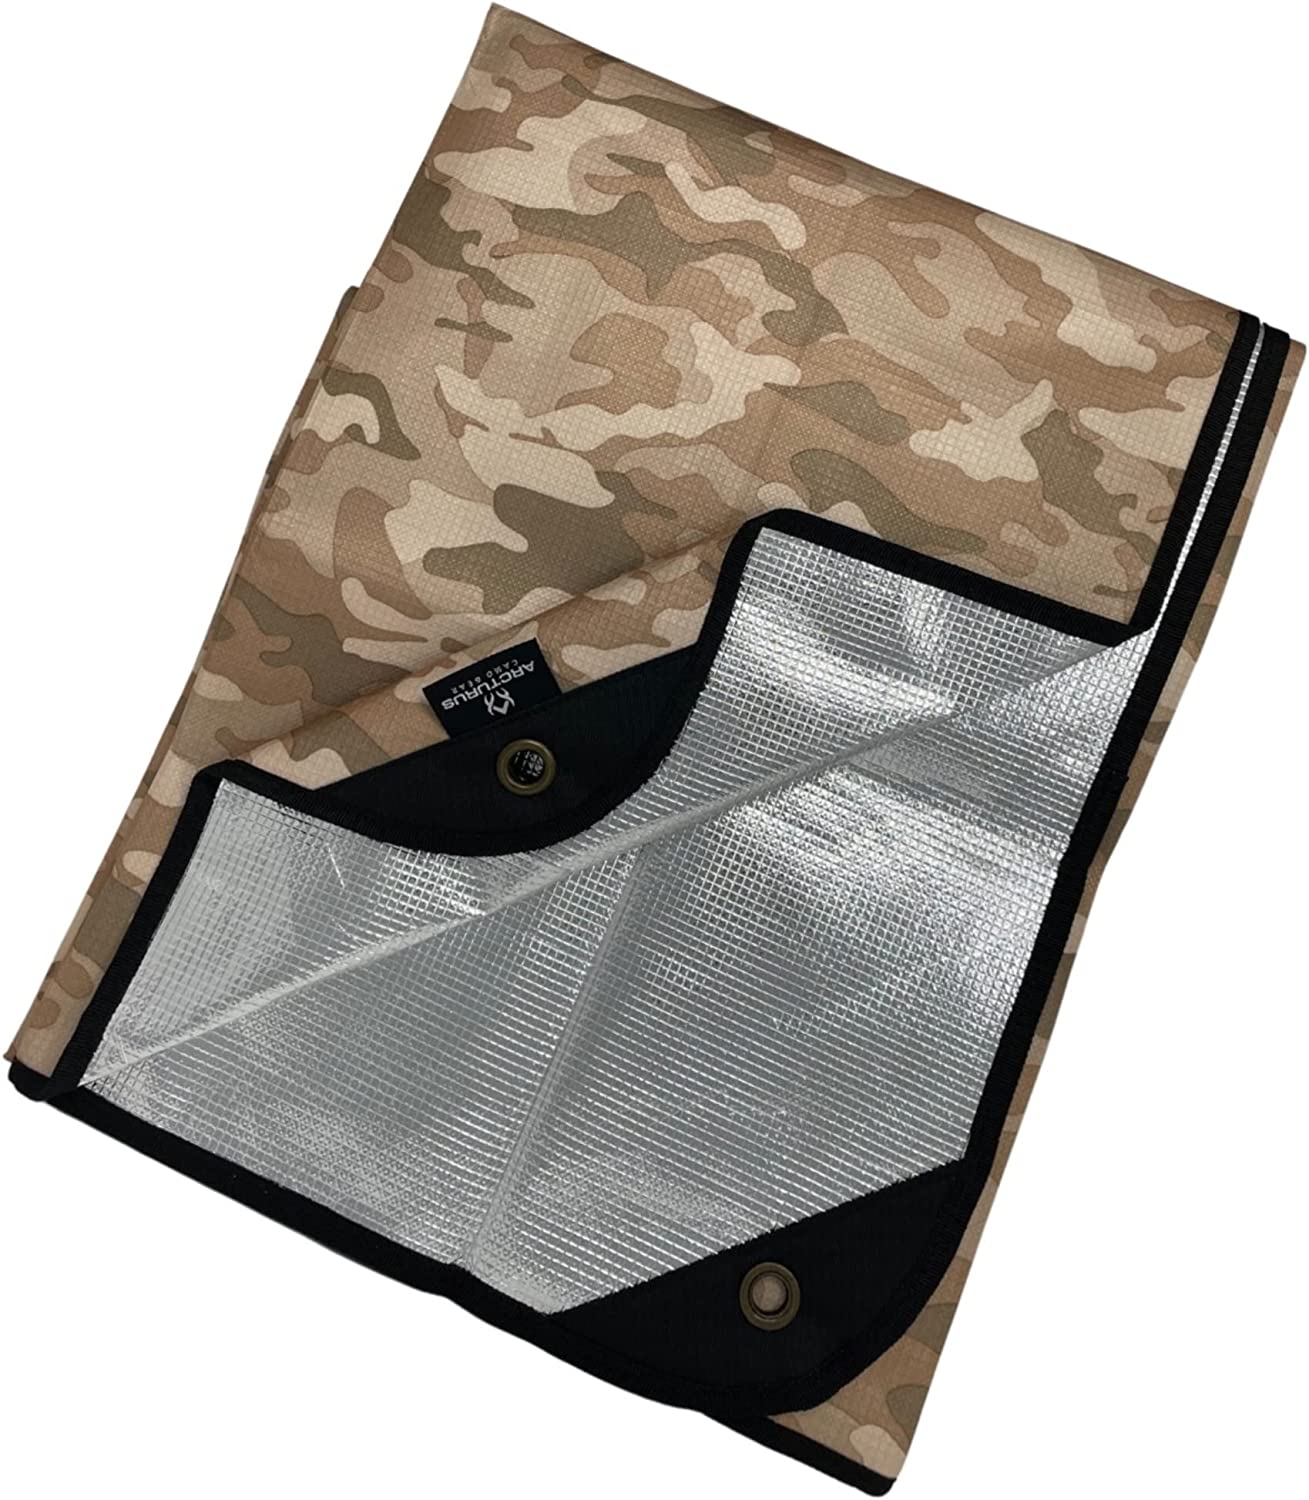 Arcturus Heavy Duty Survival Blanket – Insulated Thermal Reflective Tarp – 60" x 82". All-Weather, Reusable Emergency Blanket for Car or Camping. Thermal Barrier Blocks Infrared Signature